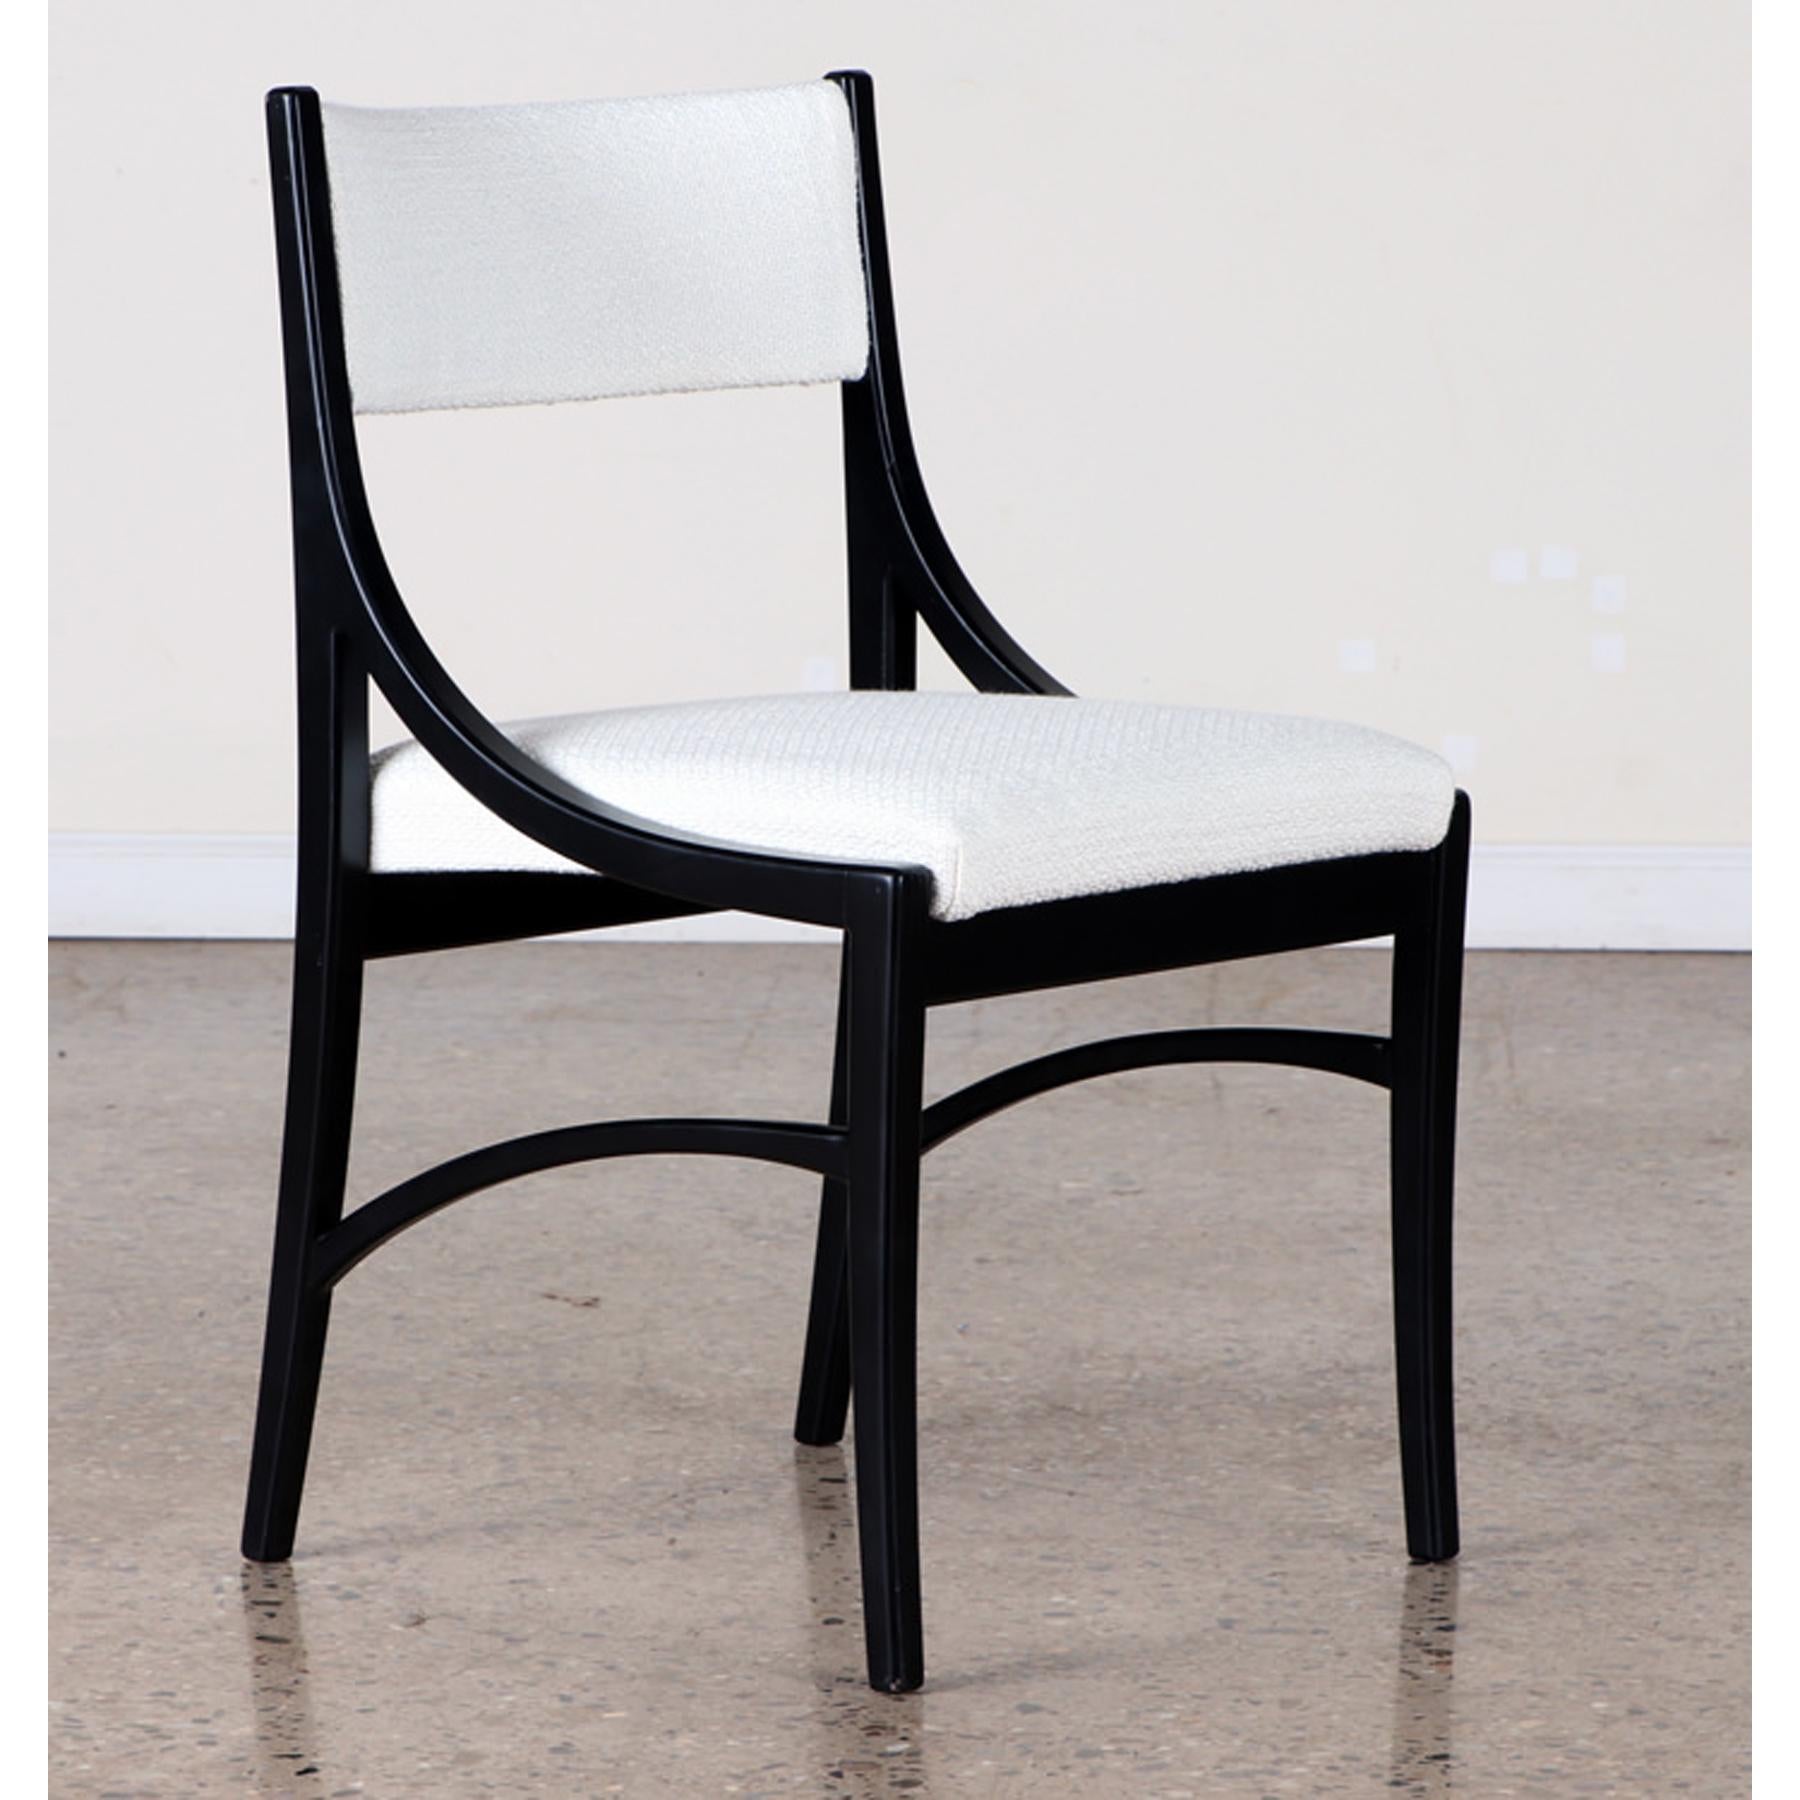 A set of 8 vintage dining chairs ebonized wood, off- white bouclee upholstery, and down swept arms, circa 1970s